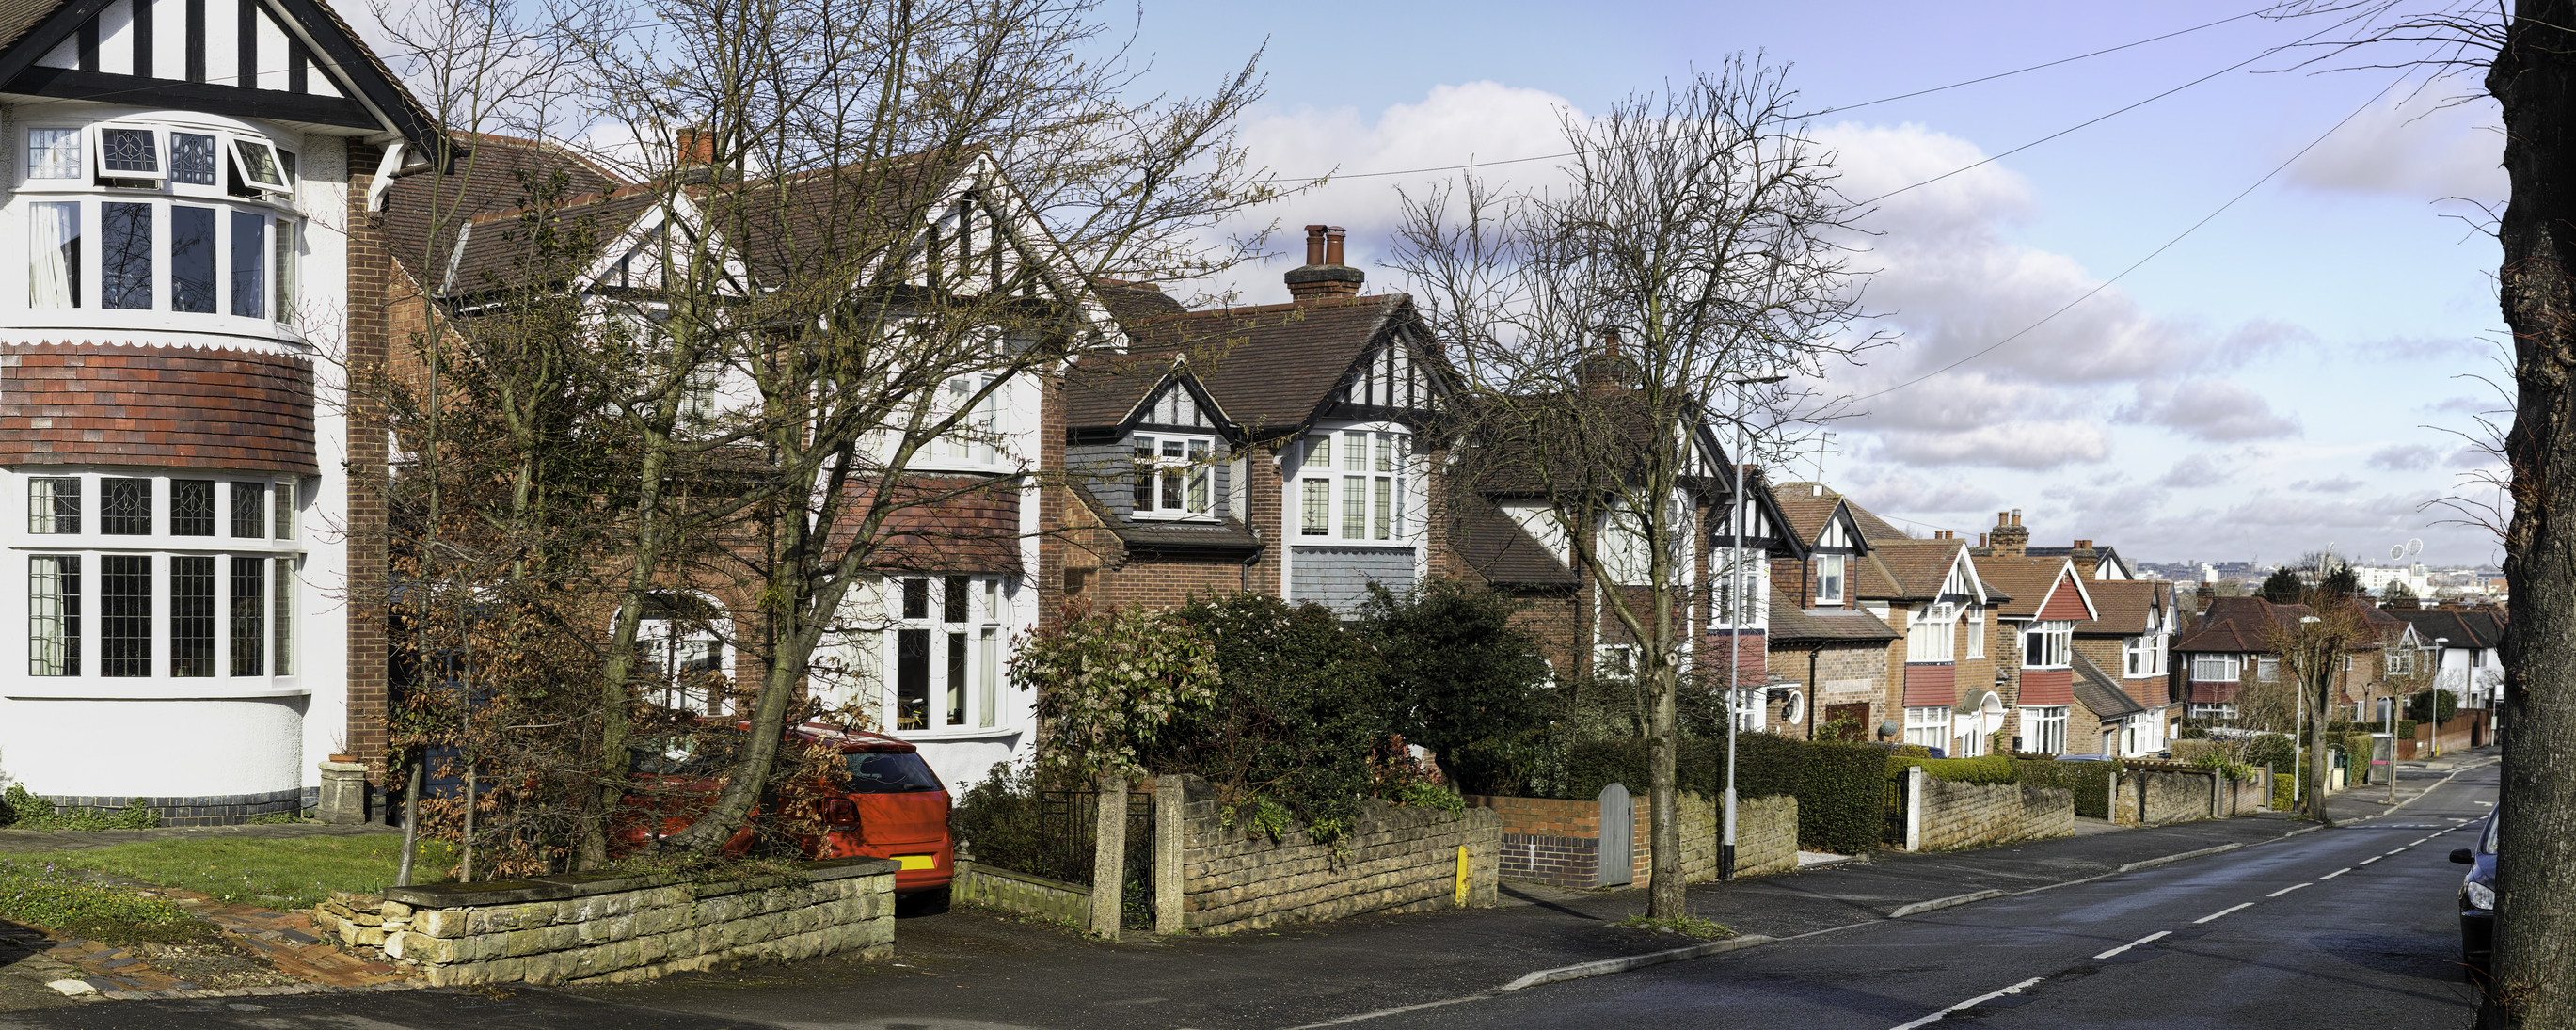 English suburban houses in the suburbs of a city, United Kingdom.